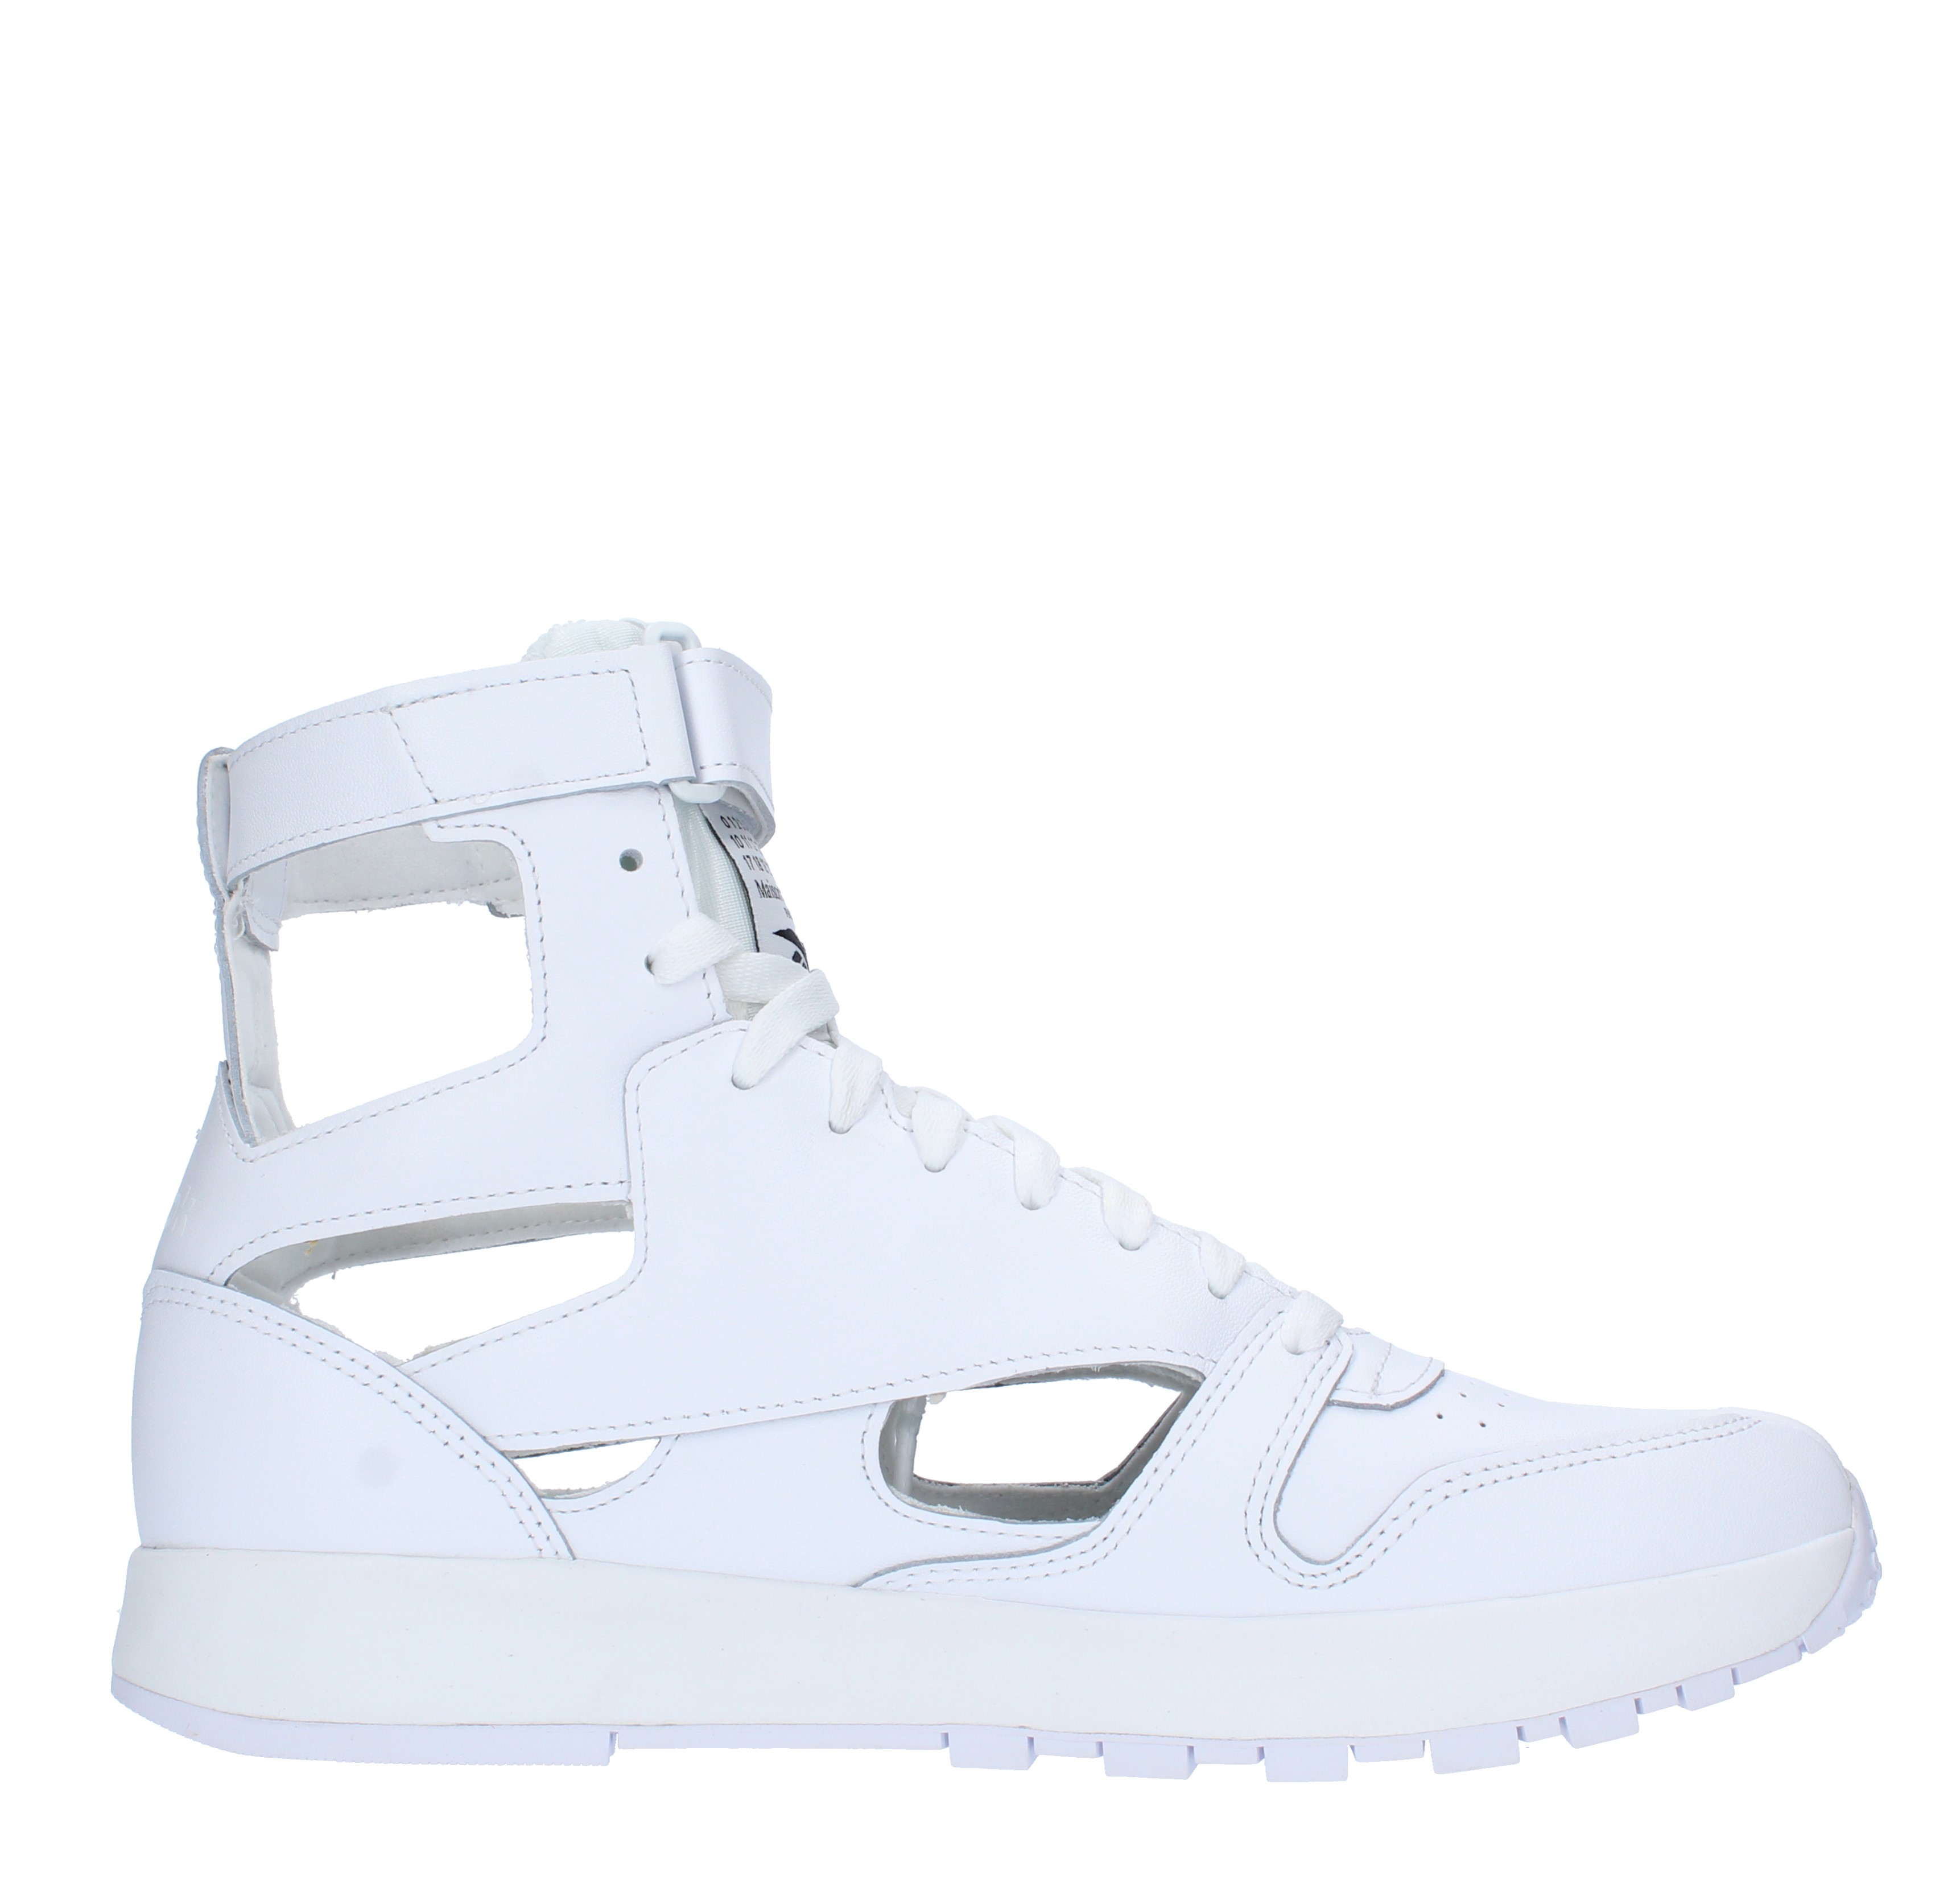 High-top trainers in leather and fabric MAISON MARGIELA x REEBOK | S37WS0569BIANCO